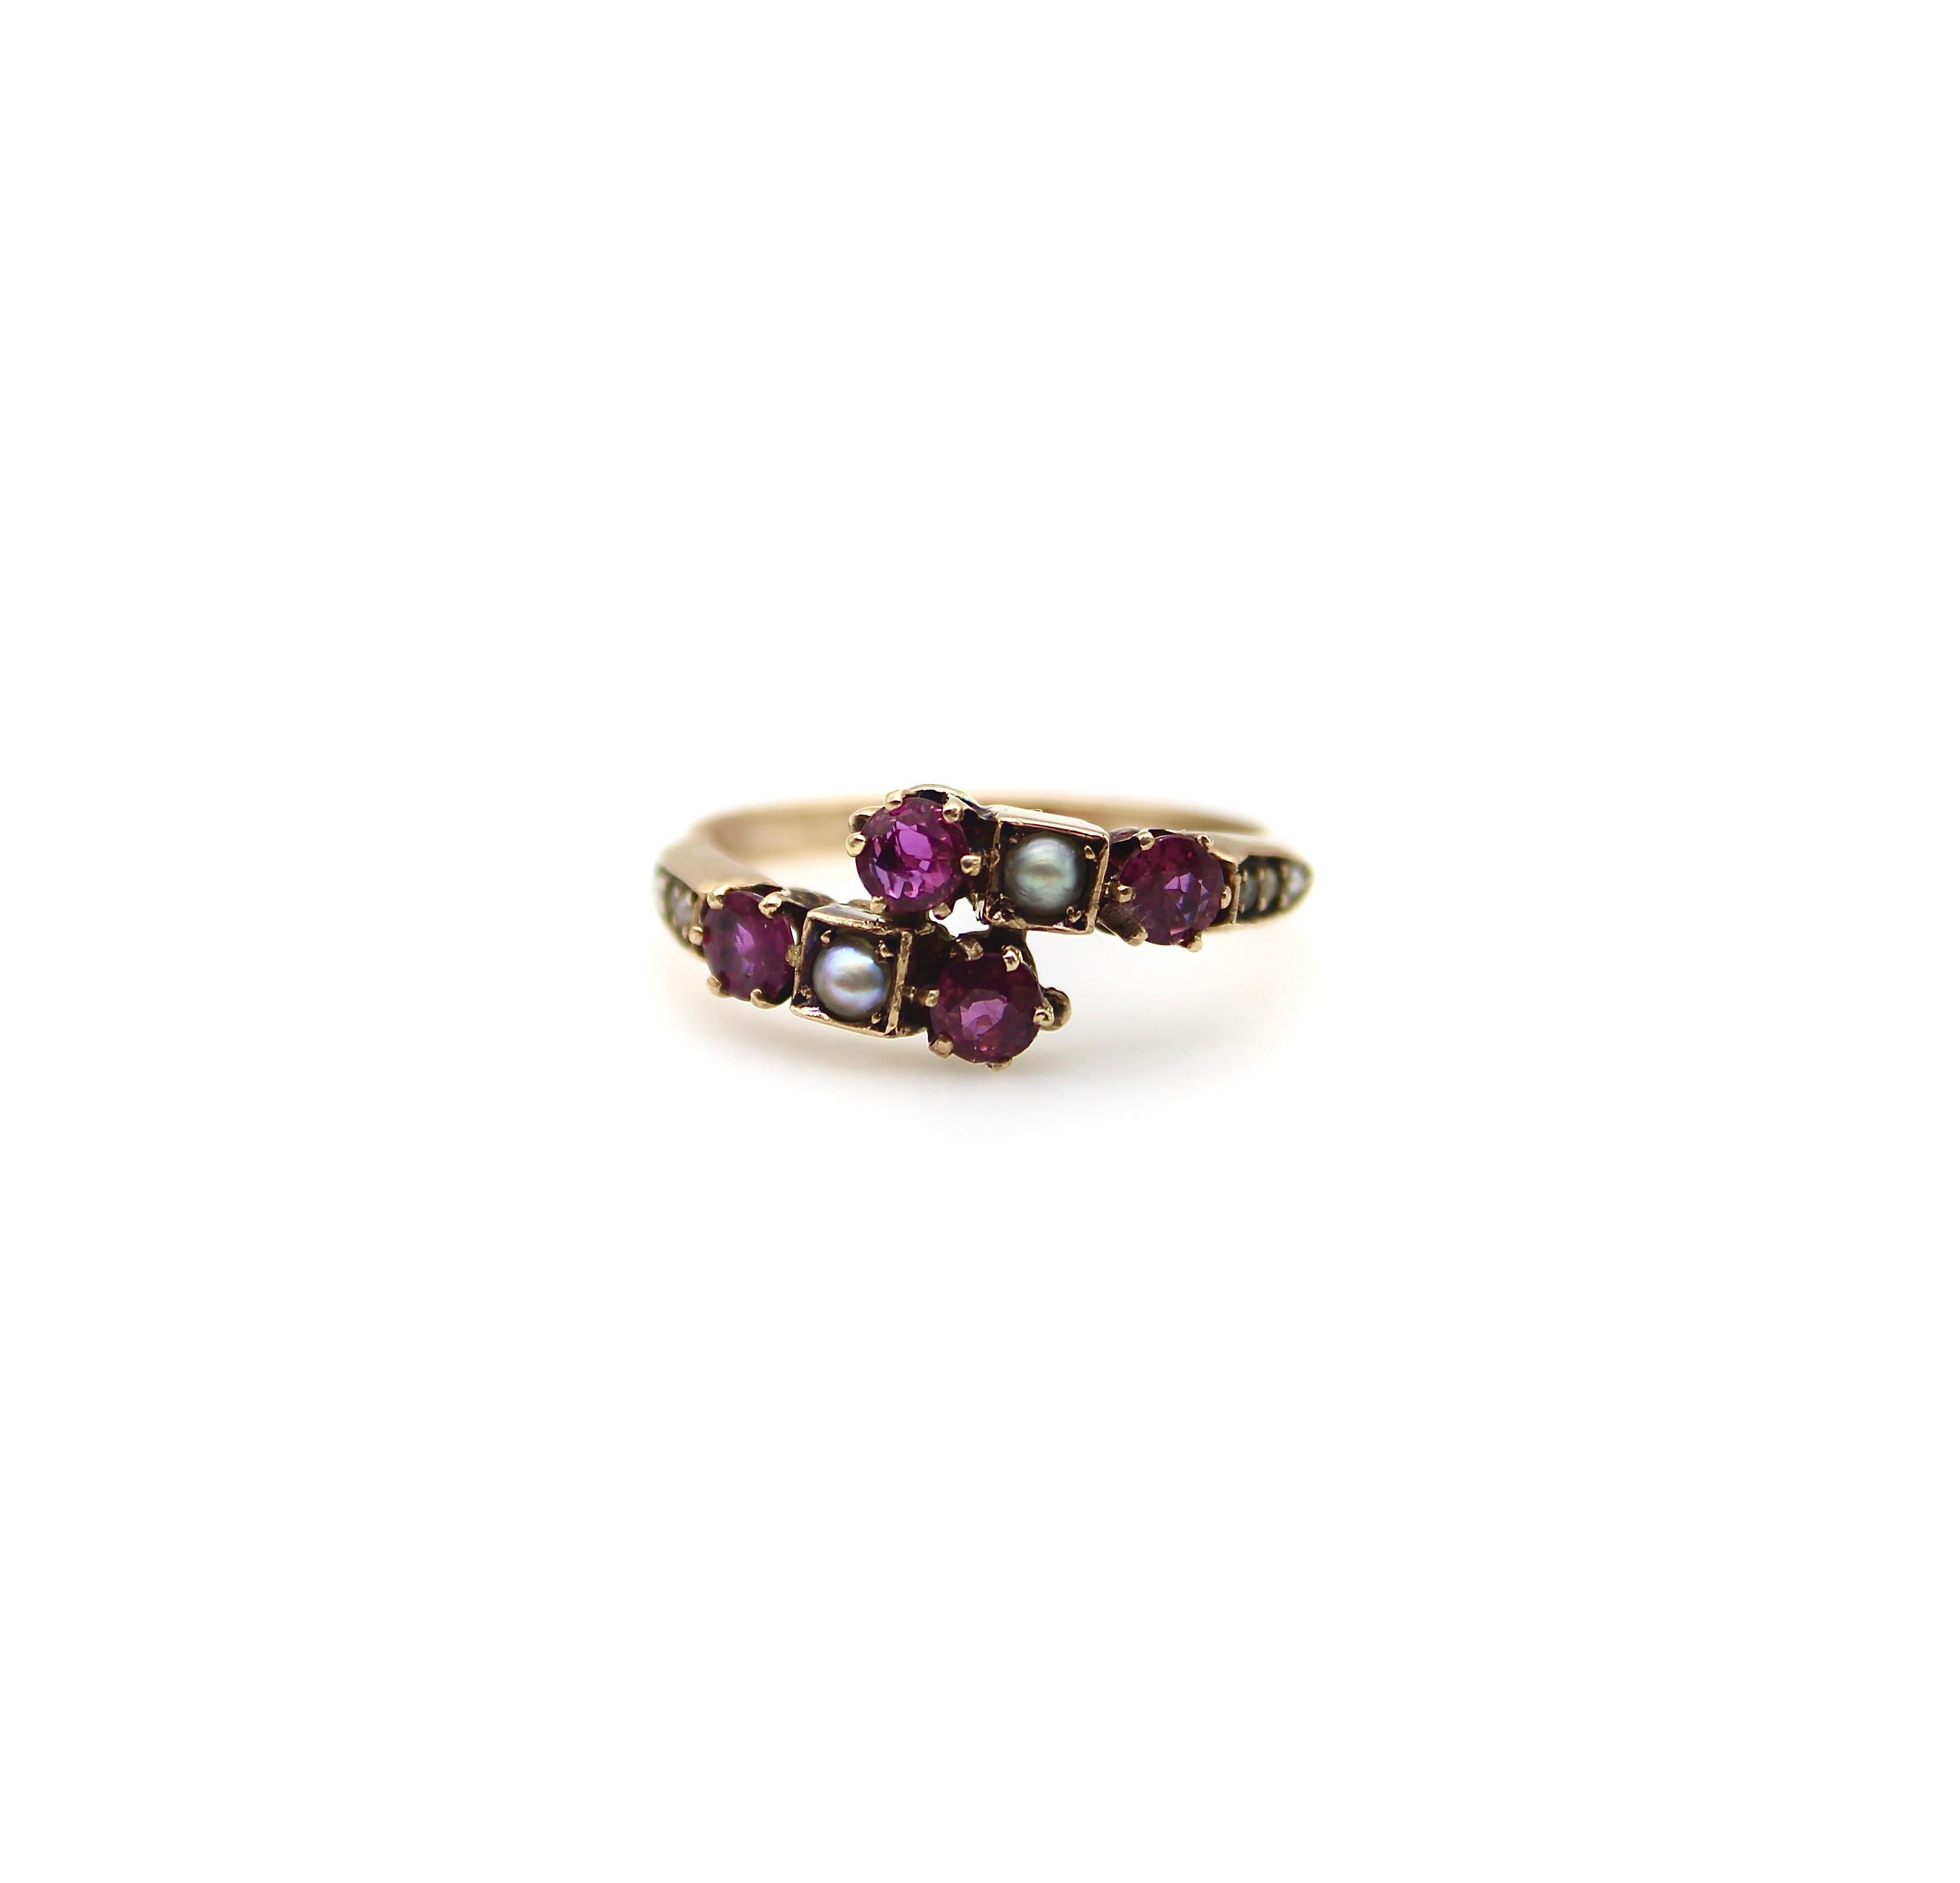 A lovely Victorian ring with classic motifs that are feminine and delicate. This 14k gold band mirrors itself and meets at the center in a cluster of gemstones—a milky white seed pearl flanked by two rubies. The gemstones are prong set, with the